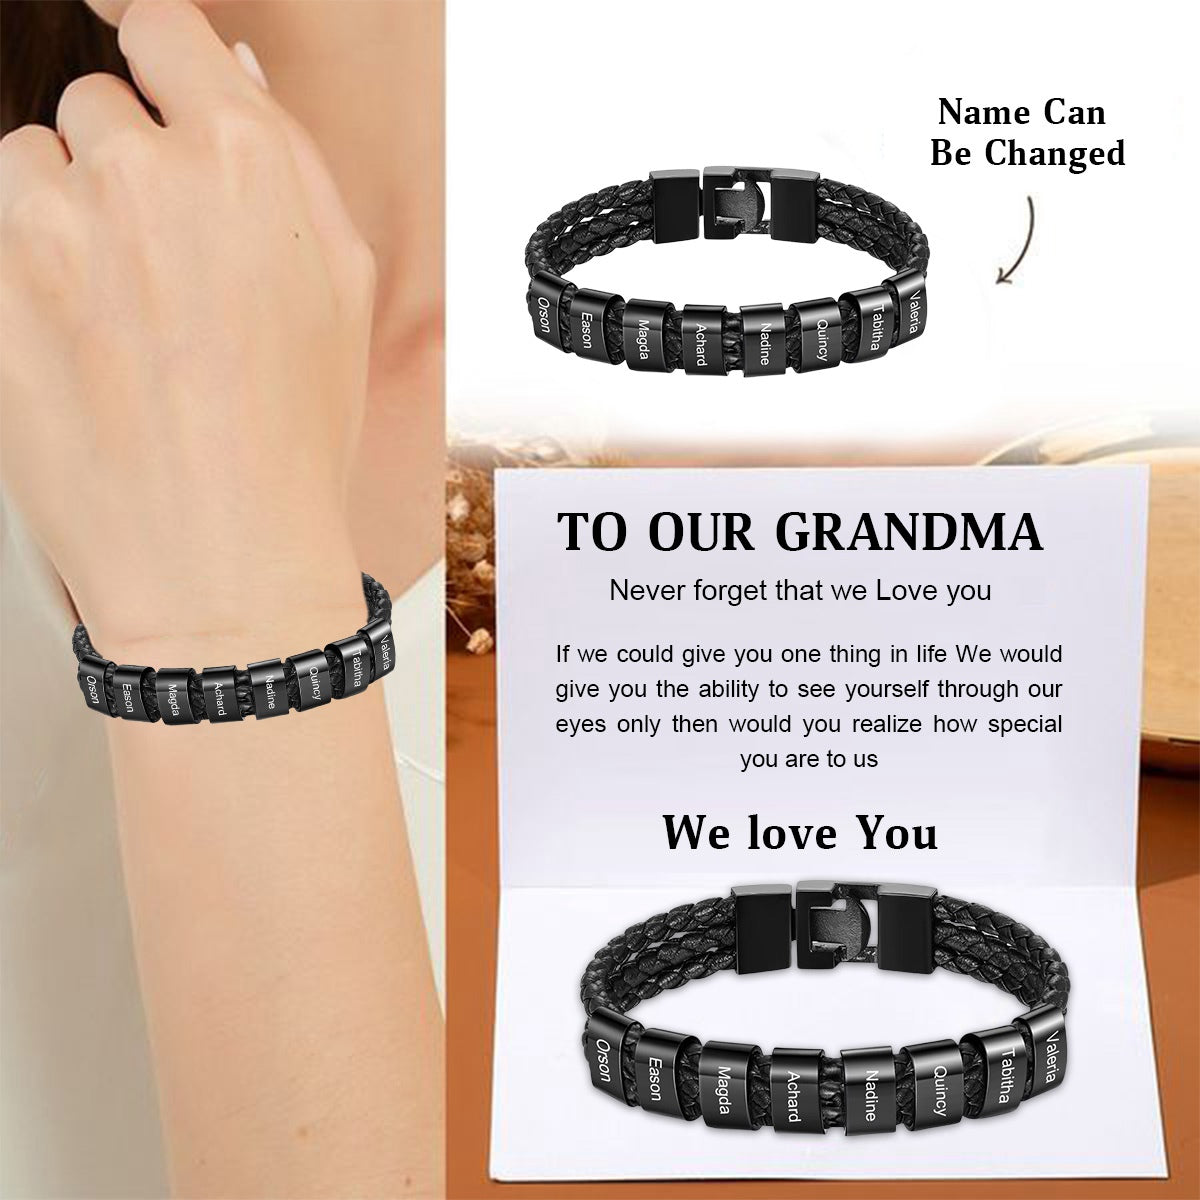 Personalized Braided Leather Bracelet Engraved 8 Names Gifts For Family,Couples